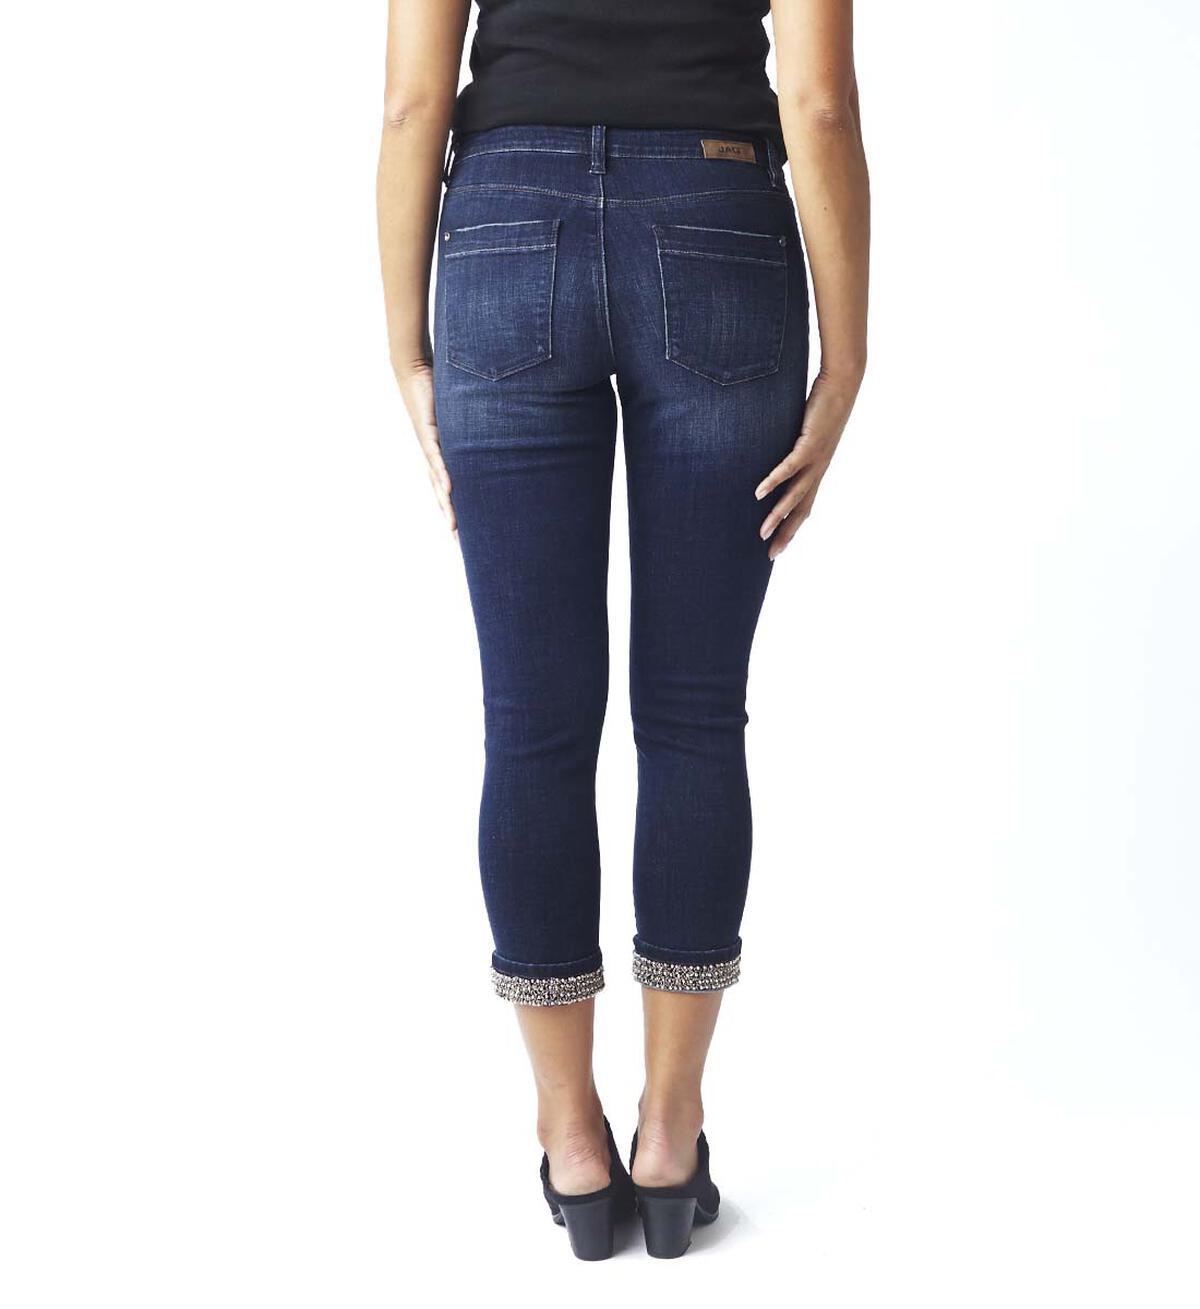 Maddie Mid Rise Skinny Beaded Cuff Jeans Petite, , hi-res image number 1